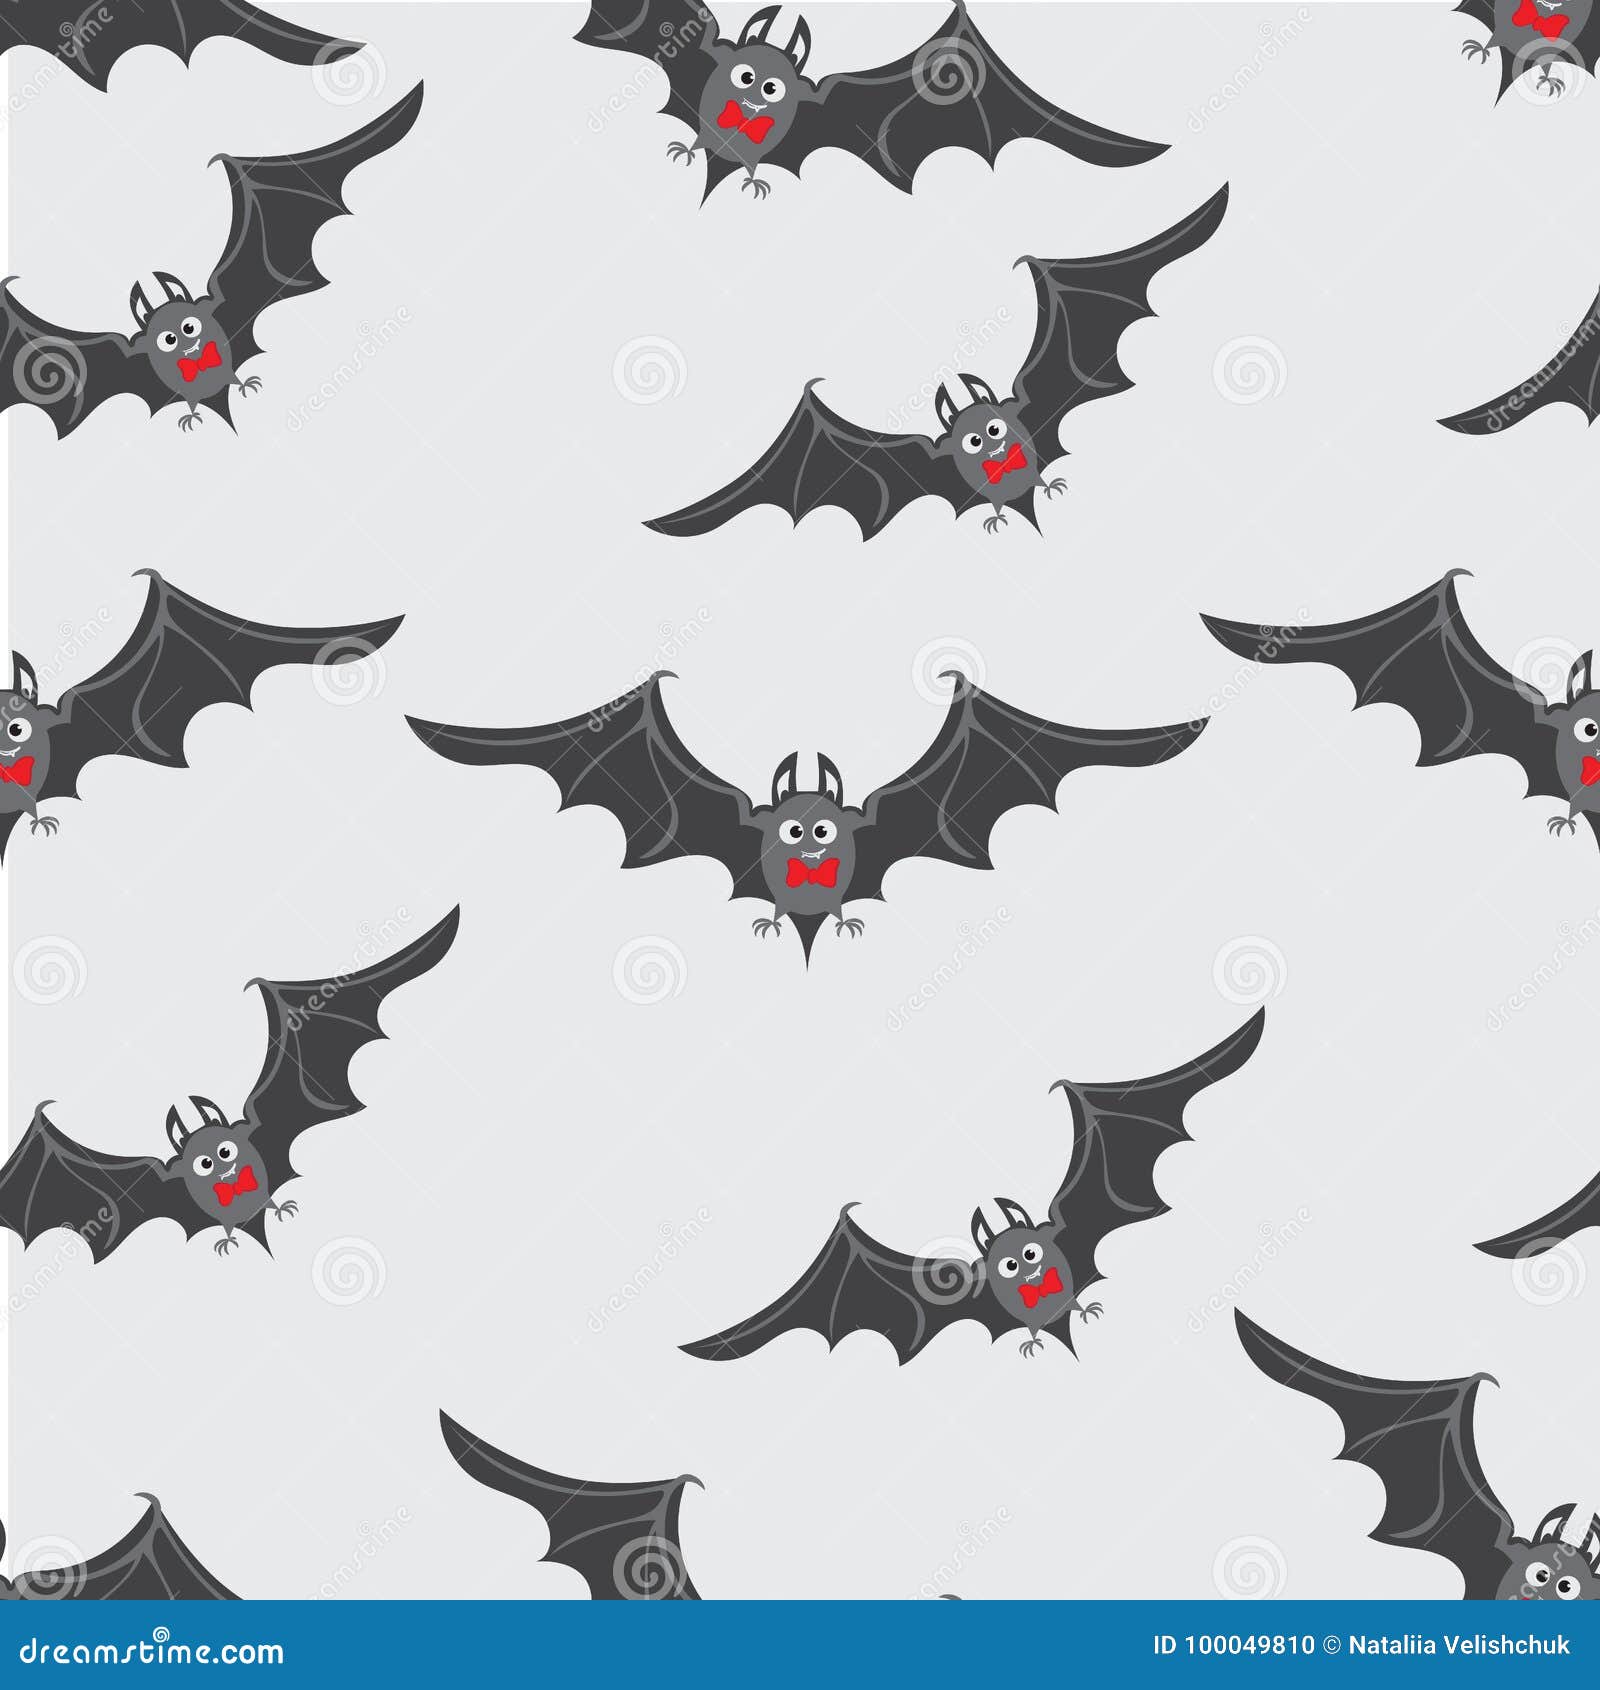 Bats with Red Bow Ties. Happy Halloween Stock Vector - Illustration of ...